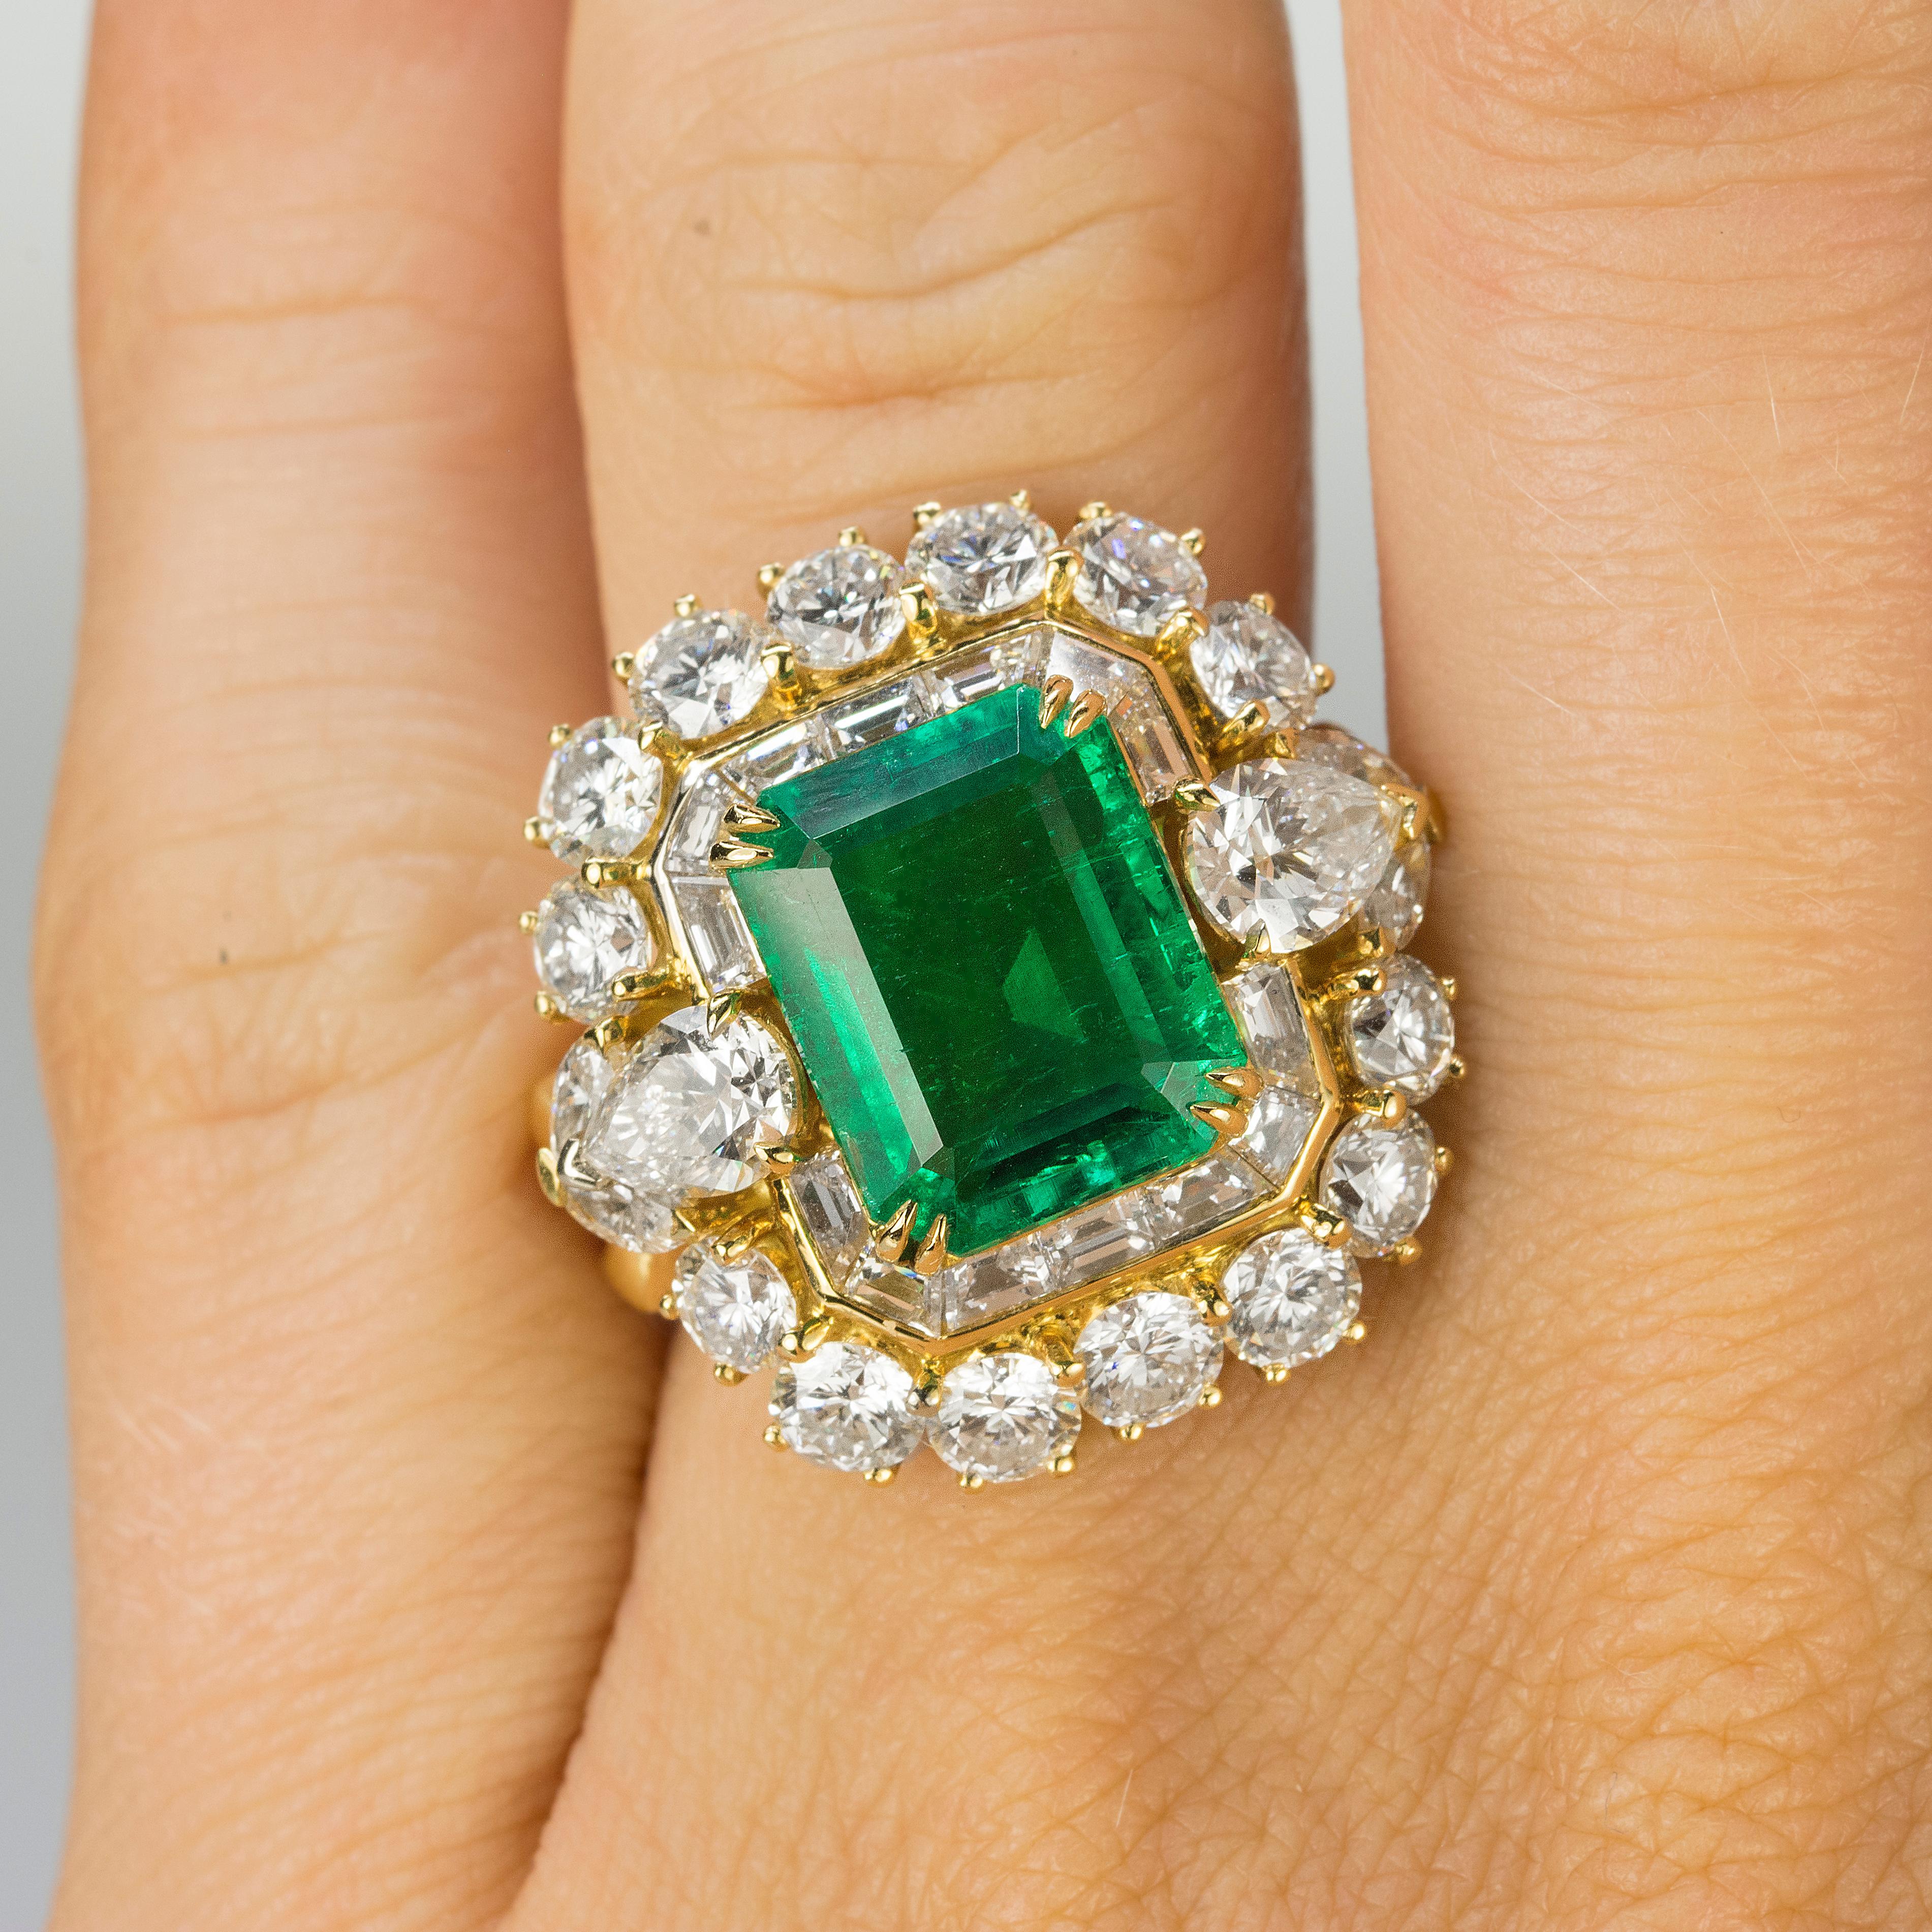 Women's or Men's Magnificent 6.25 Carat Colombian Emerald Diamond Ring